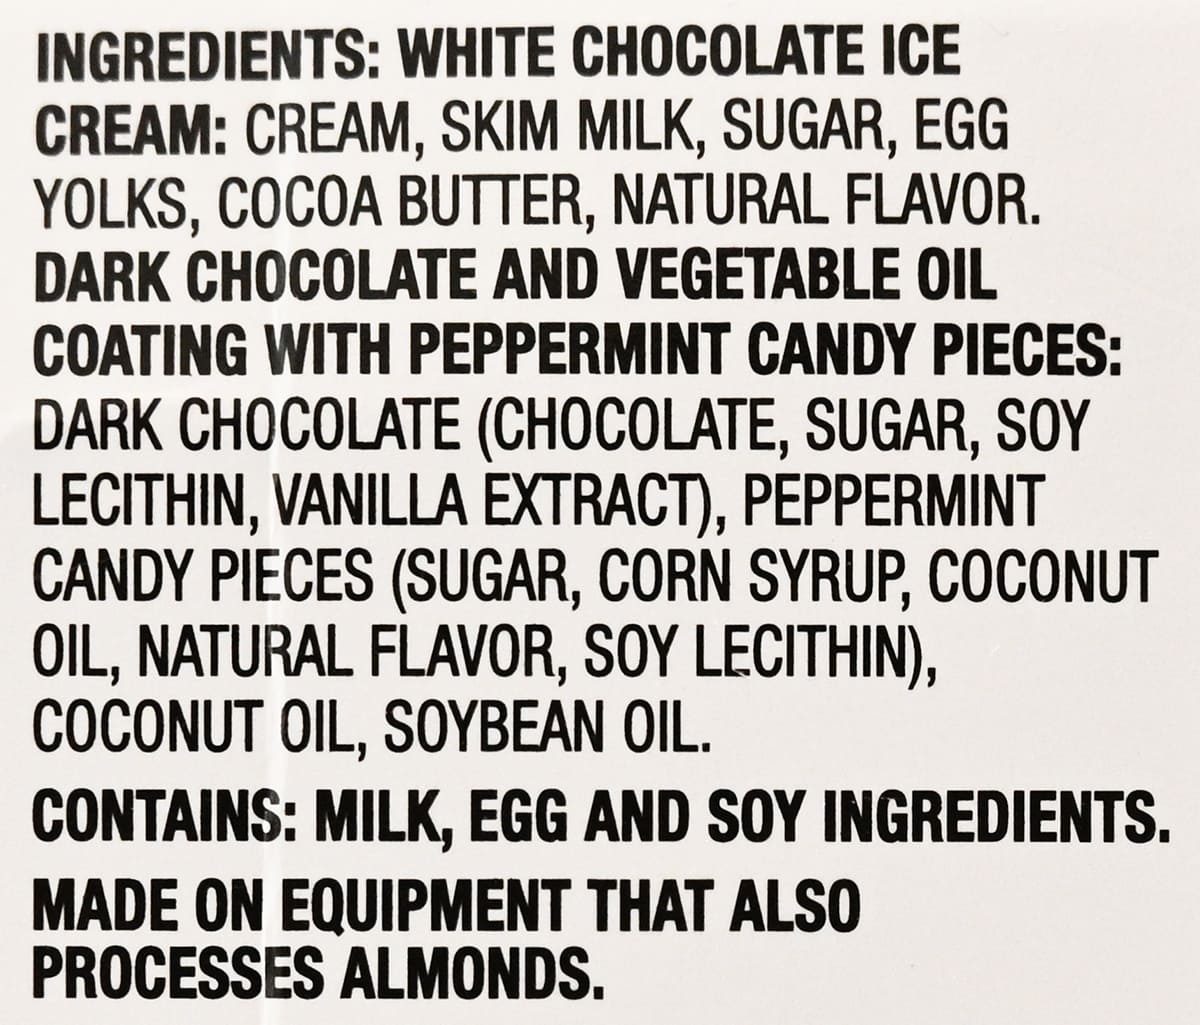 Image of the ingredients label from the back of the box.